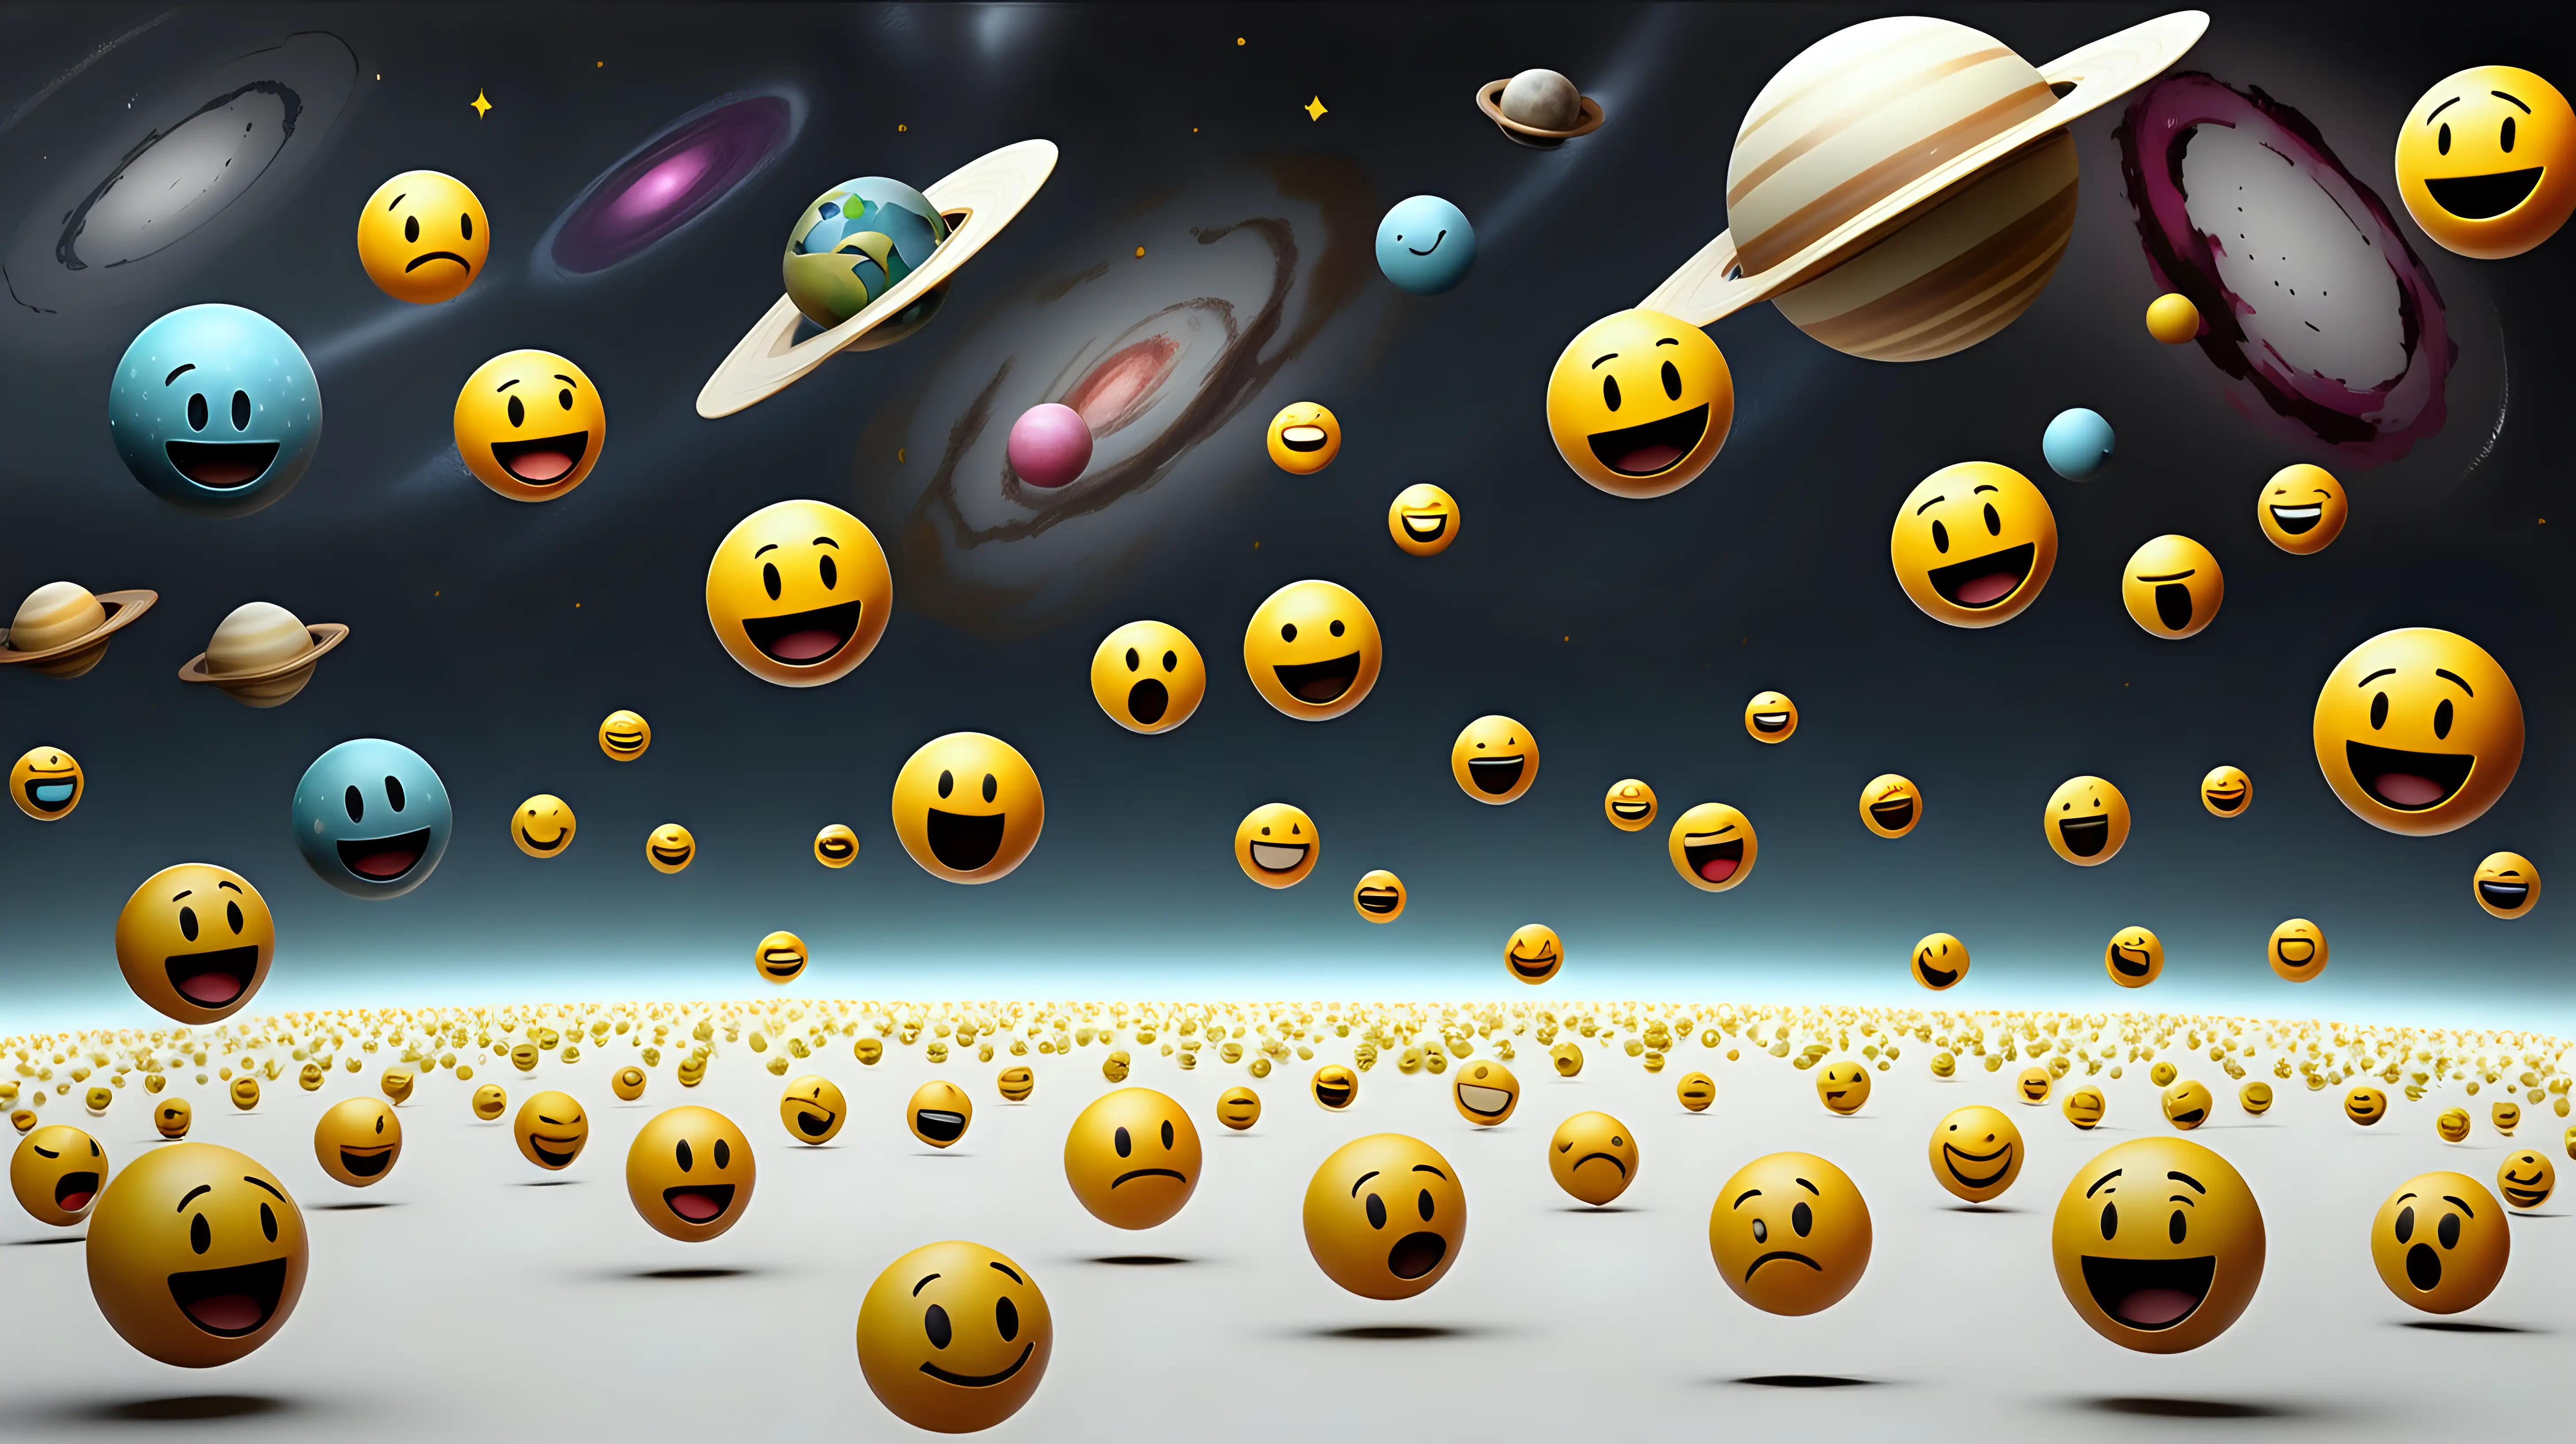 Infinite Space Emoticons Vibrant Expressions in the Cosmos